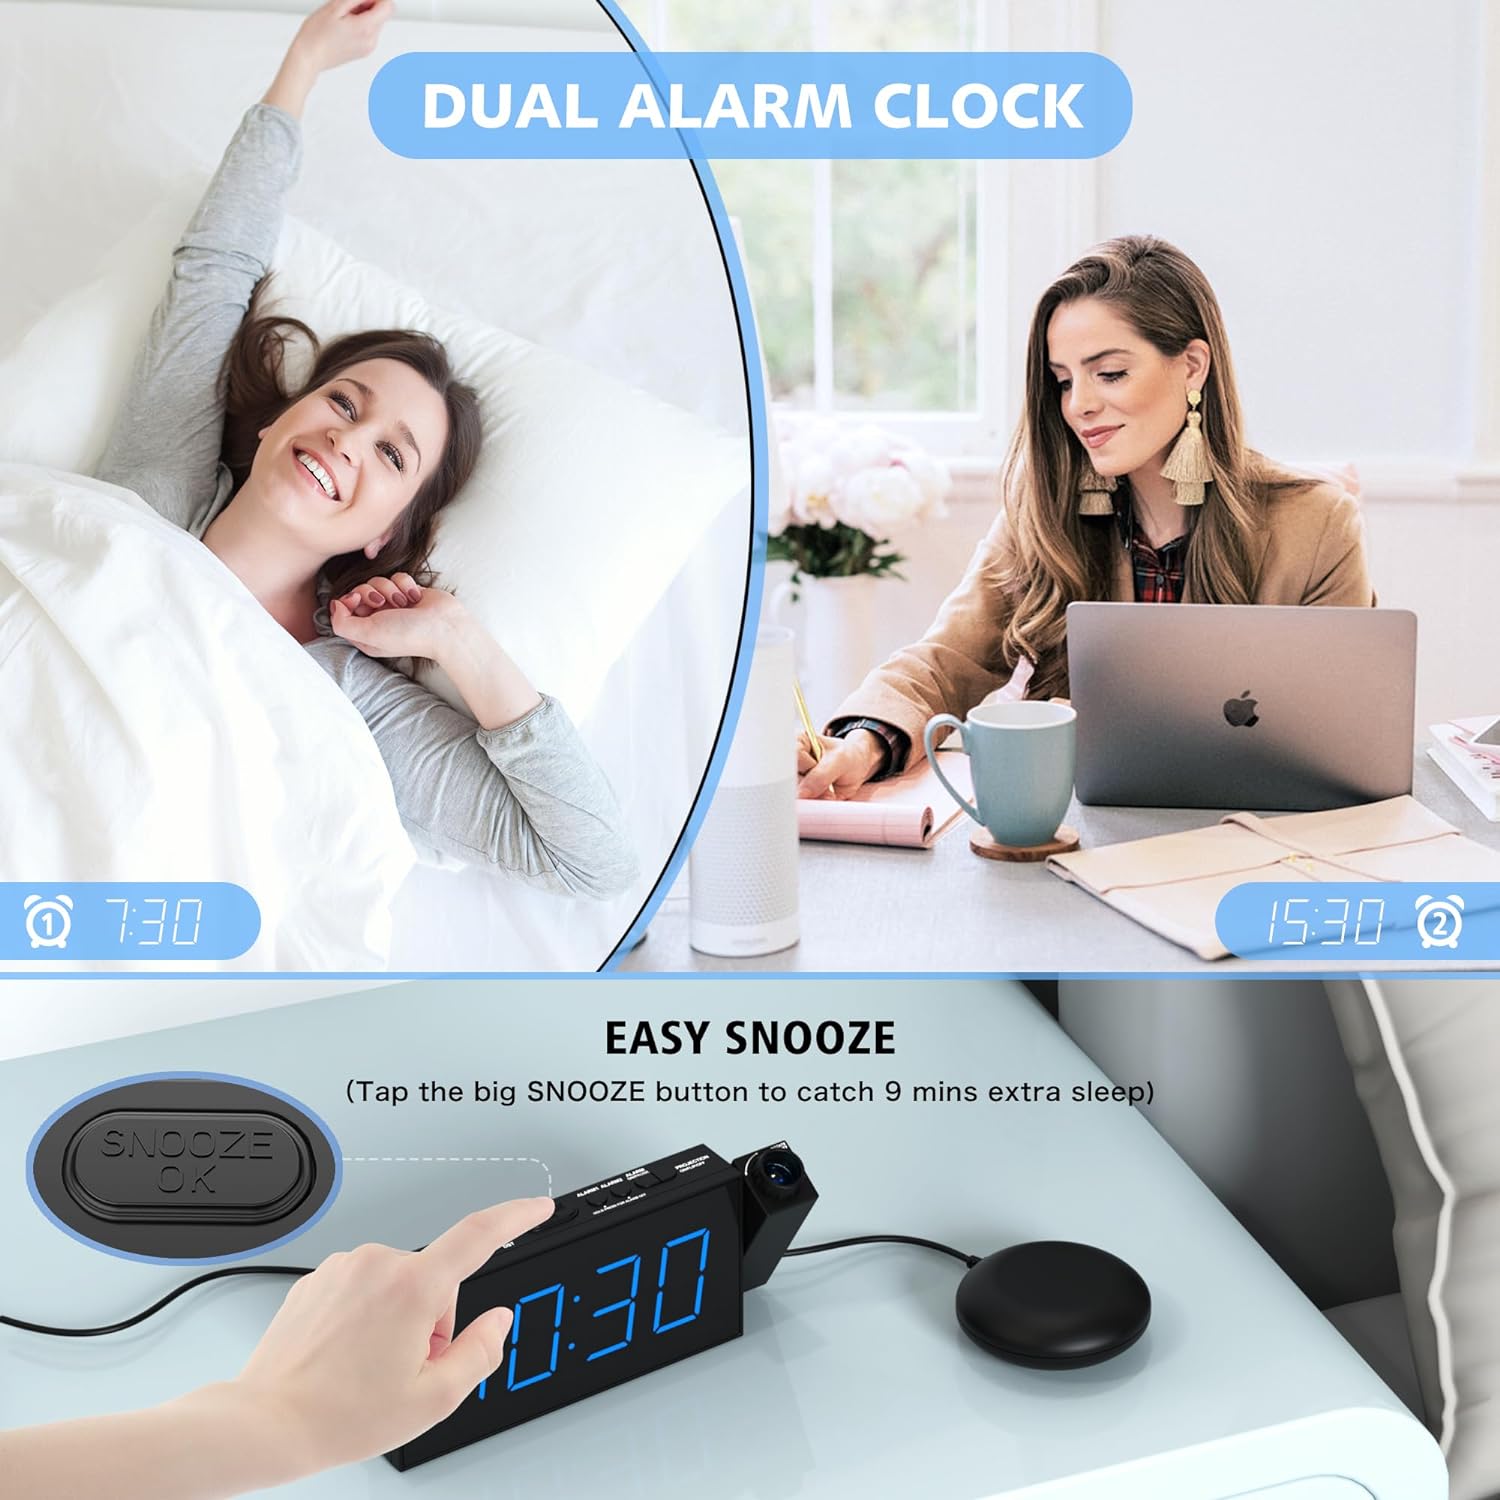 Mesqool Projection Clock with Bed Shaker Alarm, Loud Alarm Sound & Vibrating Projector Clock for Heavy Sleepers, 7" LED Display & Dimmer,12/24H, DST, USB Charger, Battery Backup for Bedrooms, Ceiling